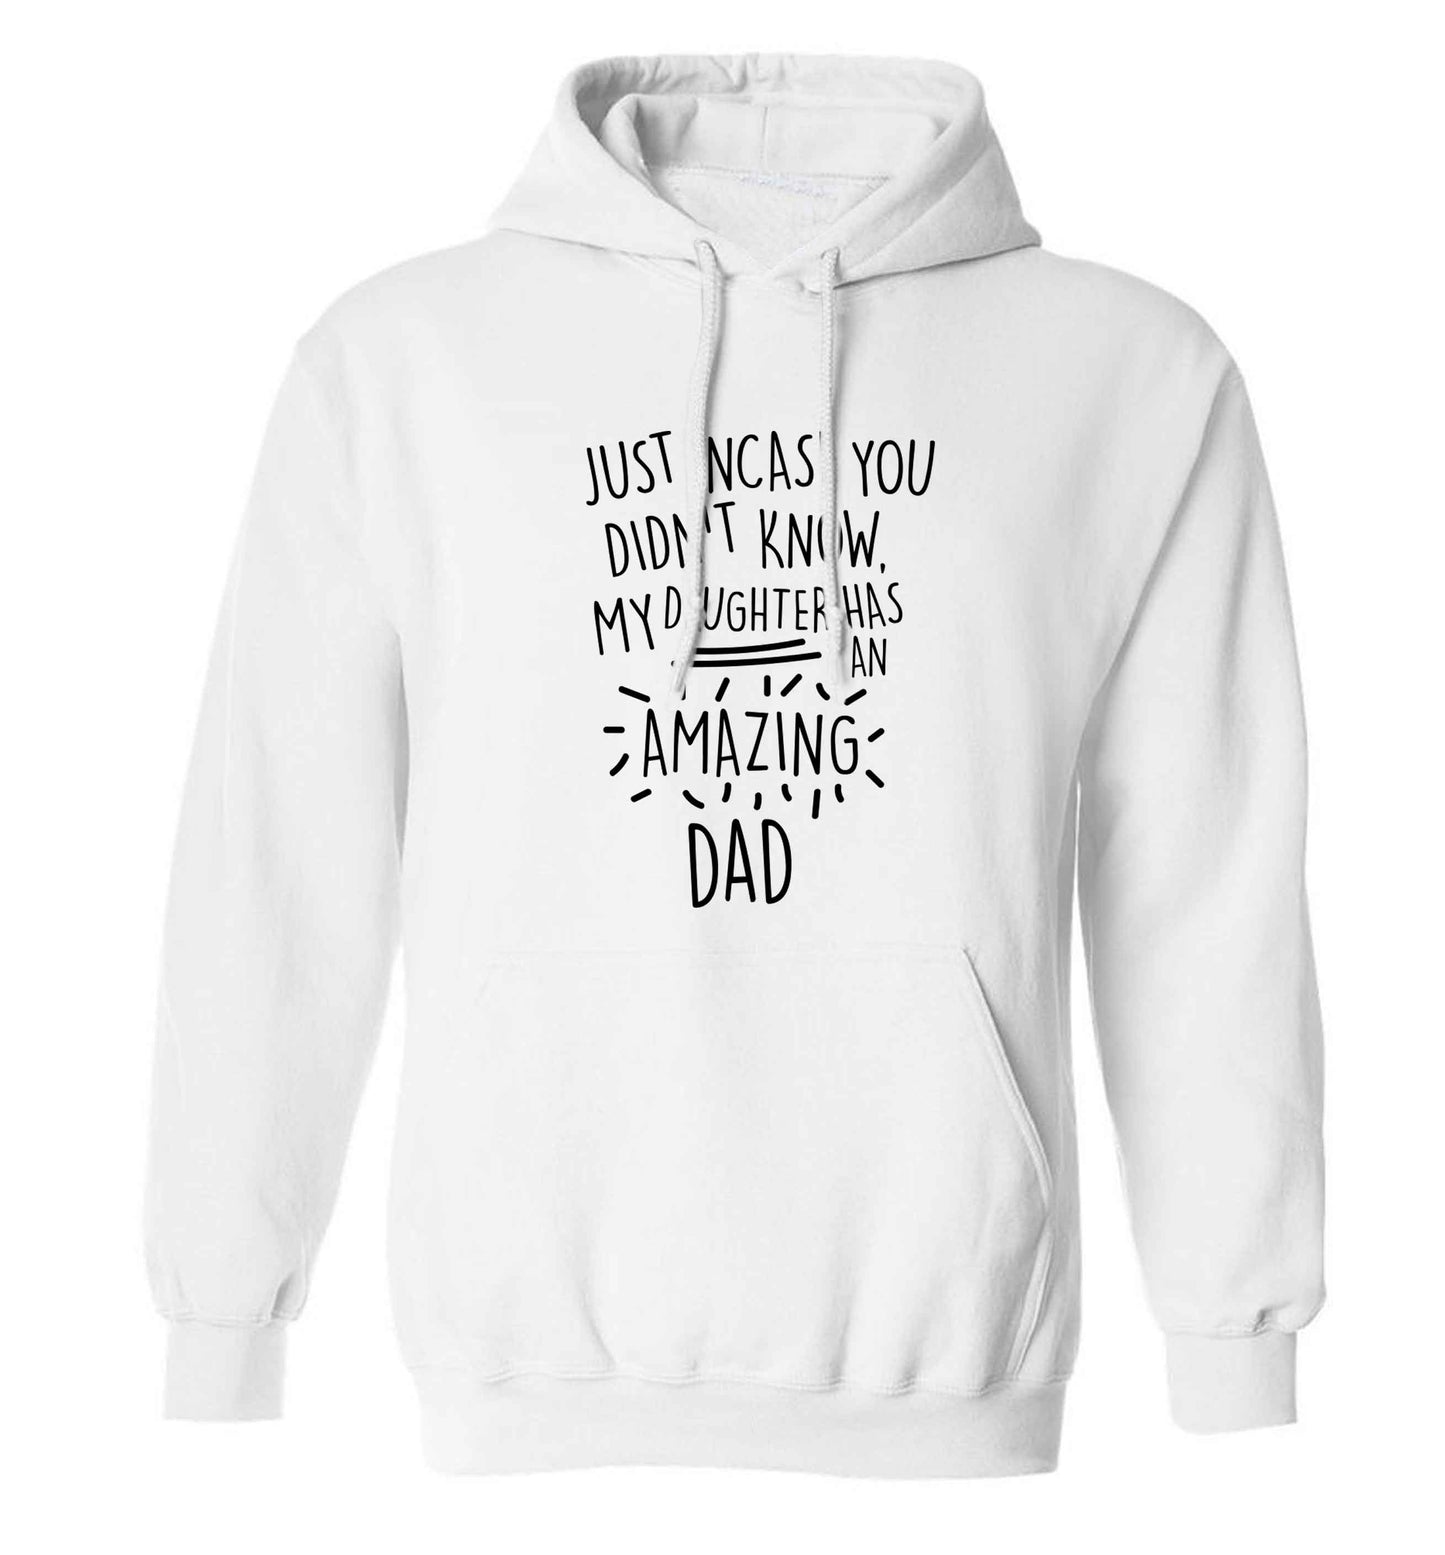 Just incase you didn't know my daughter has an amazing dad adults unisex white hoodie 2XL